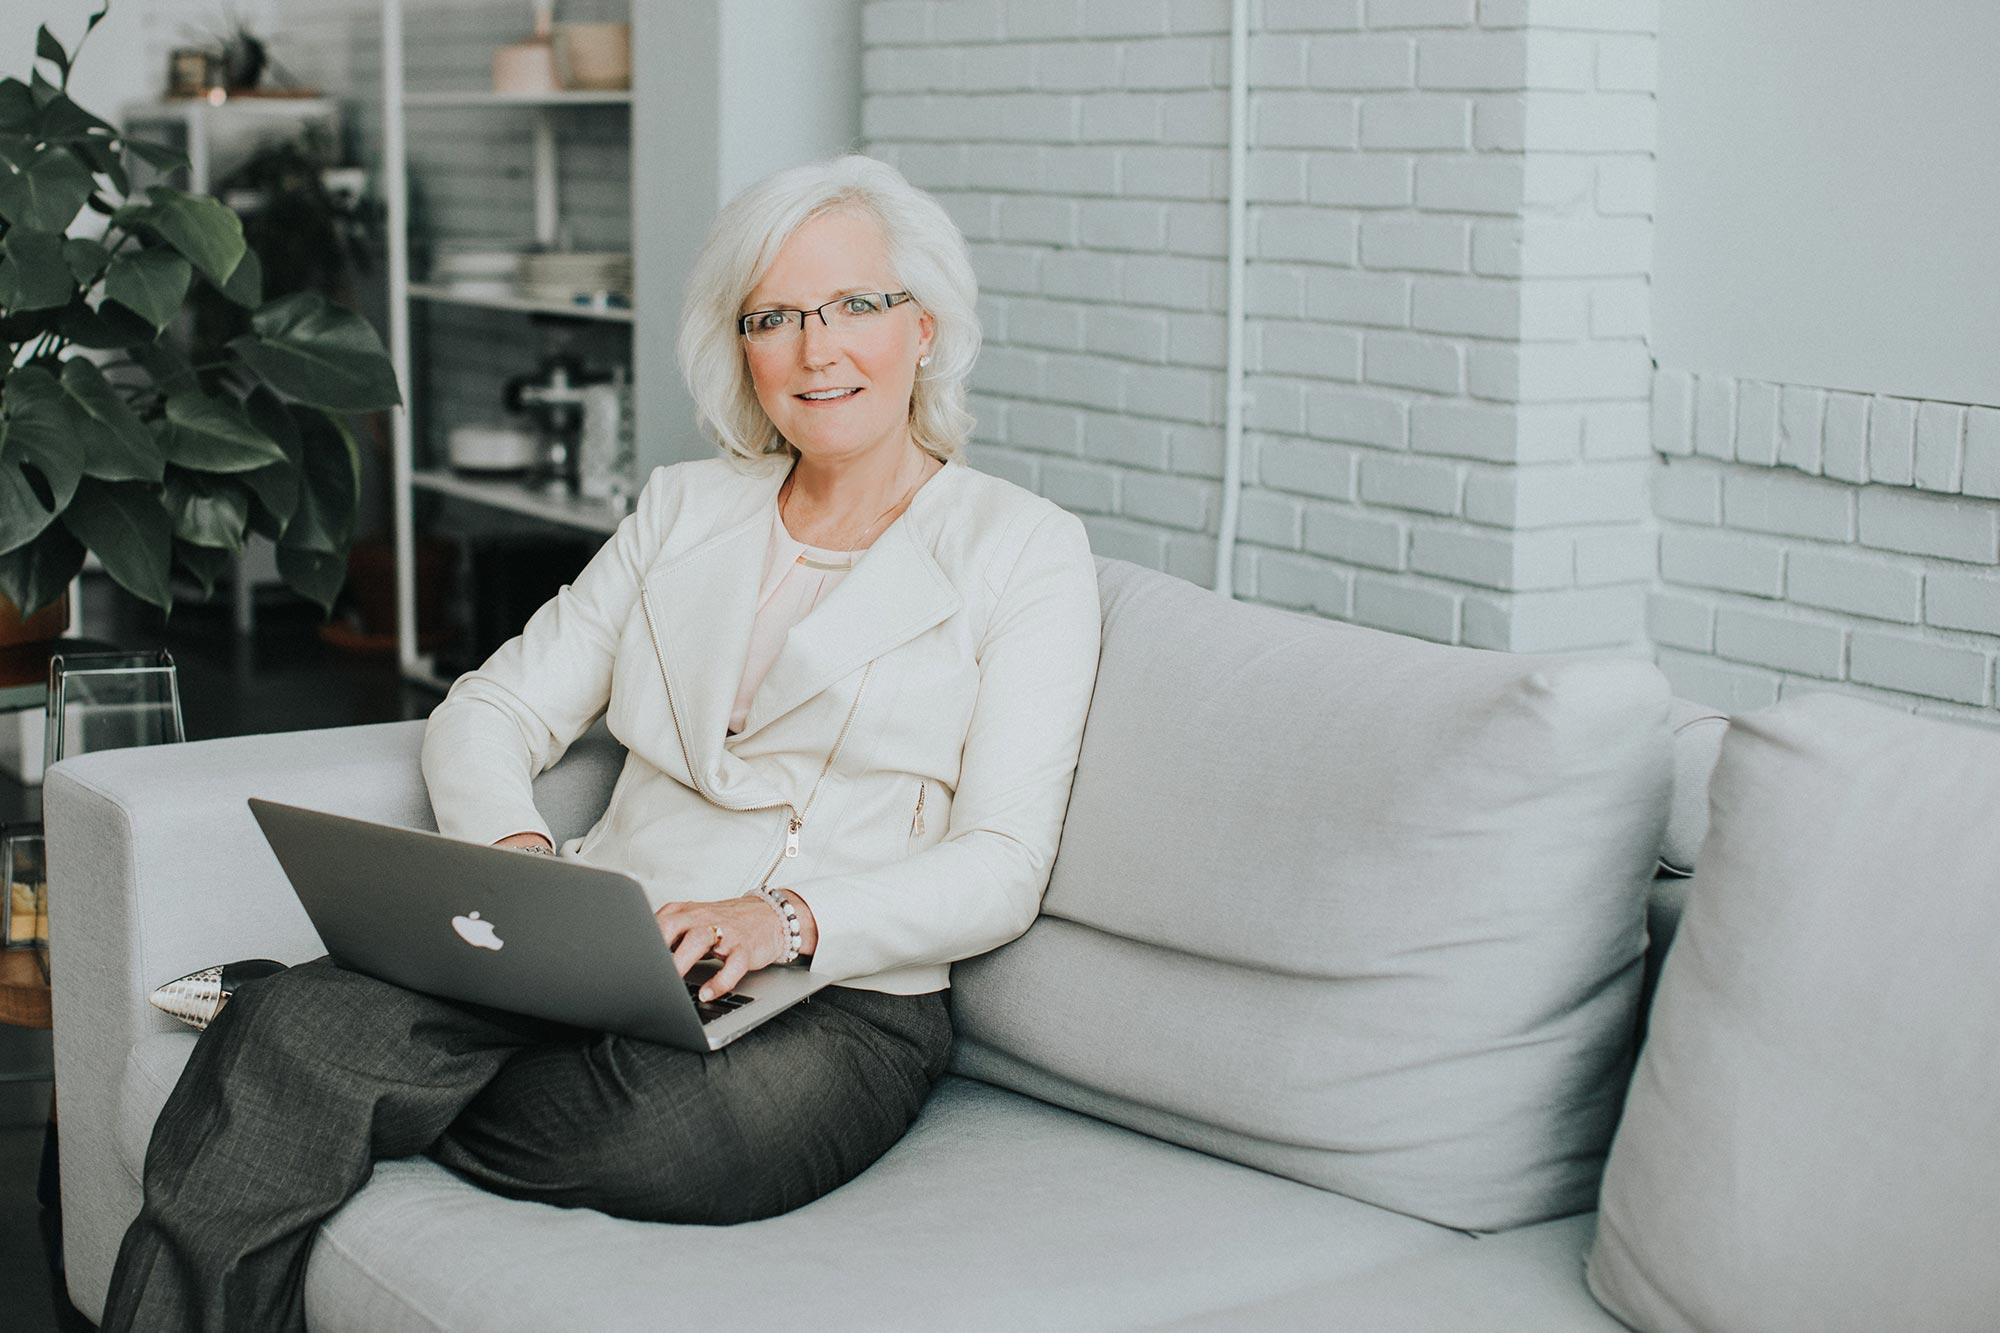 Photograph of Nancy M. Dahl sitting on the couch with her computer.